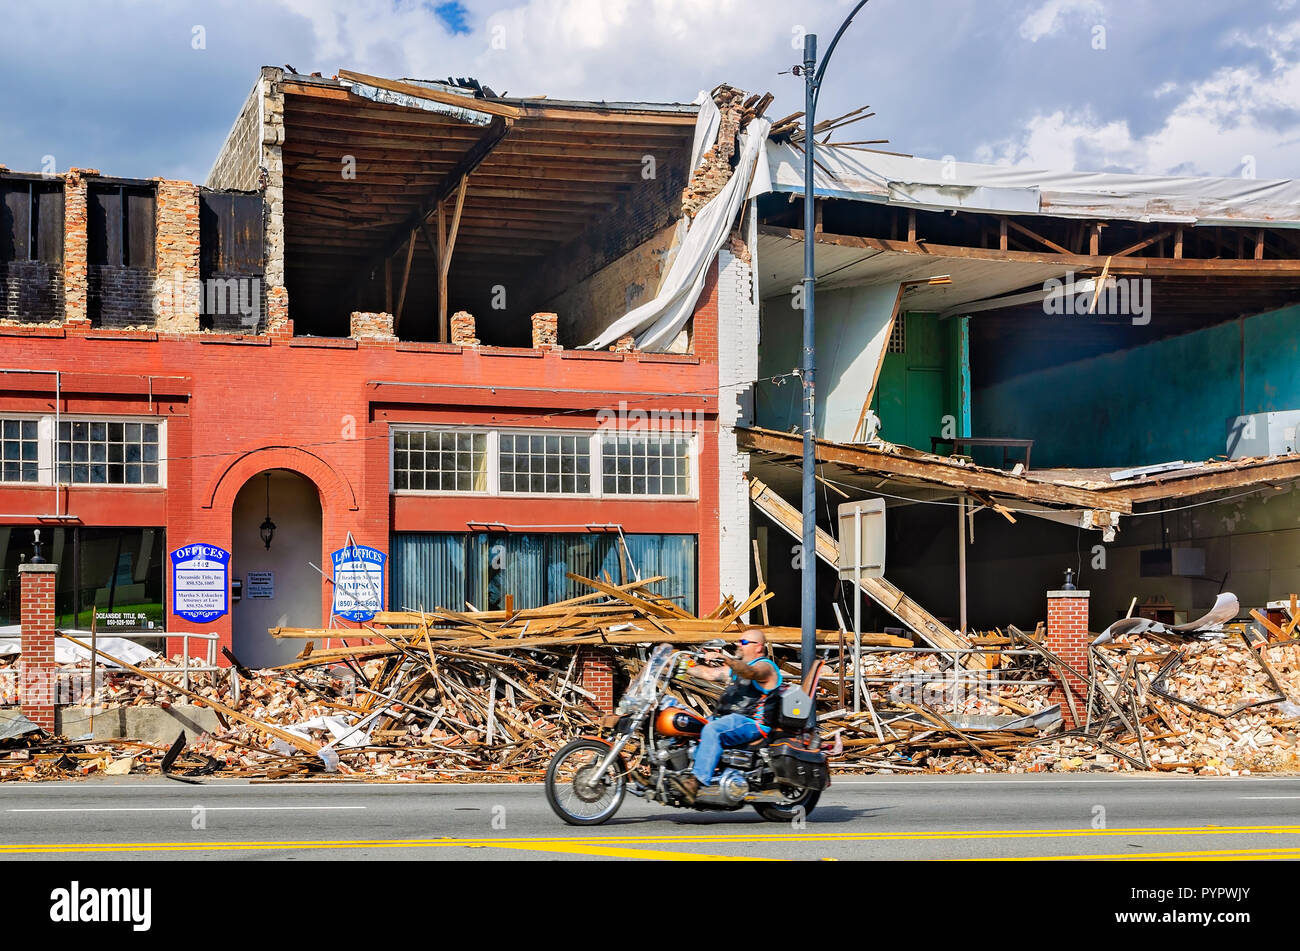 A motorcyclist drives past damaged buildings on Lafayette Street after Hurricane Michael, Oct. 20, 2018, in Marianna, Florida. Stock Photo